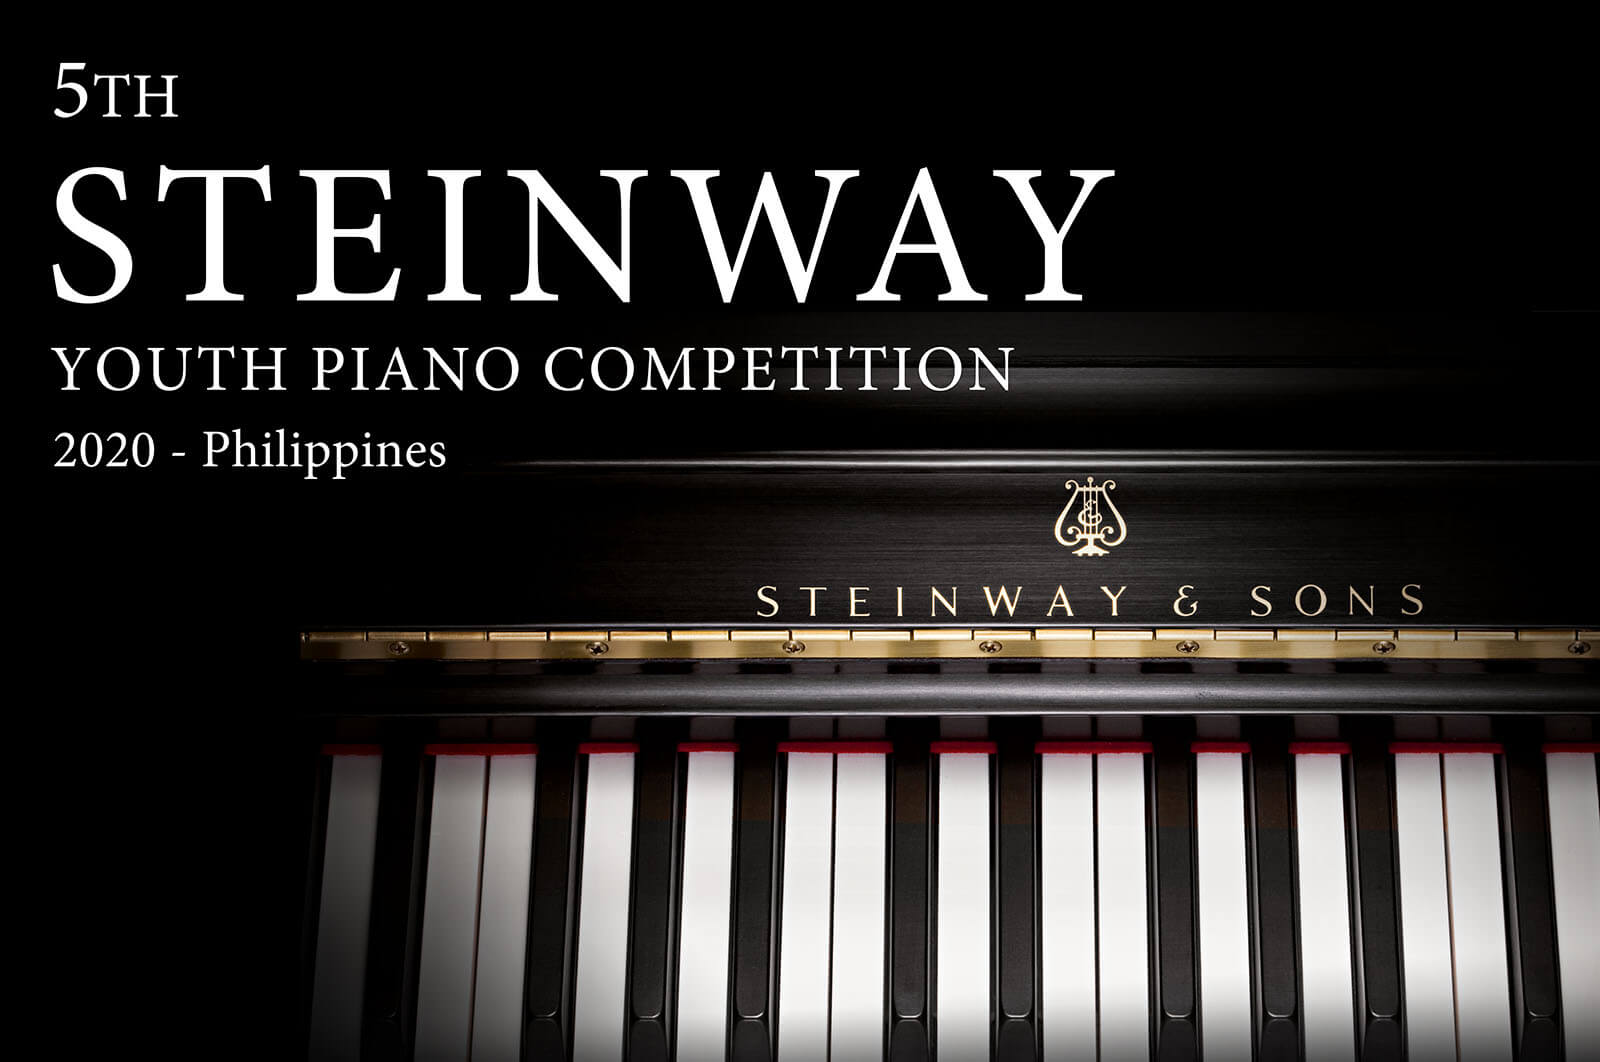 5th Steinway Youth Piano Competition